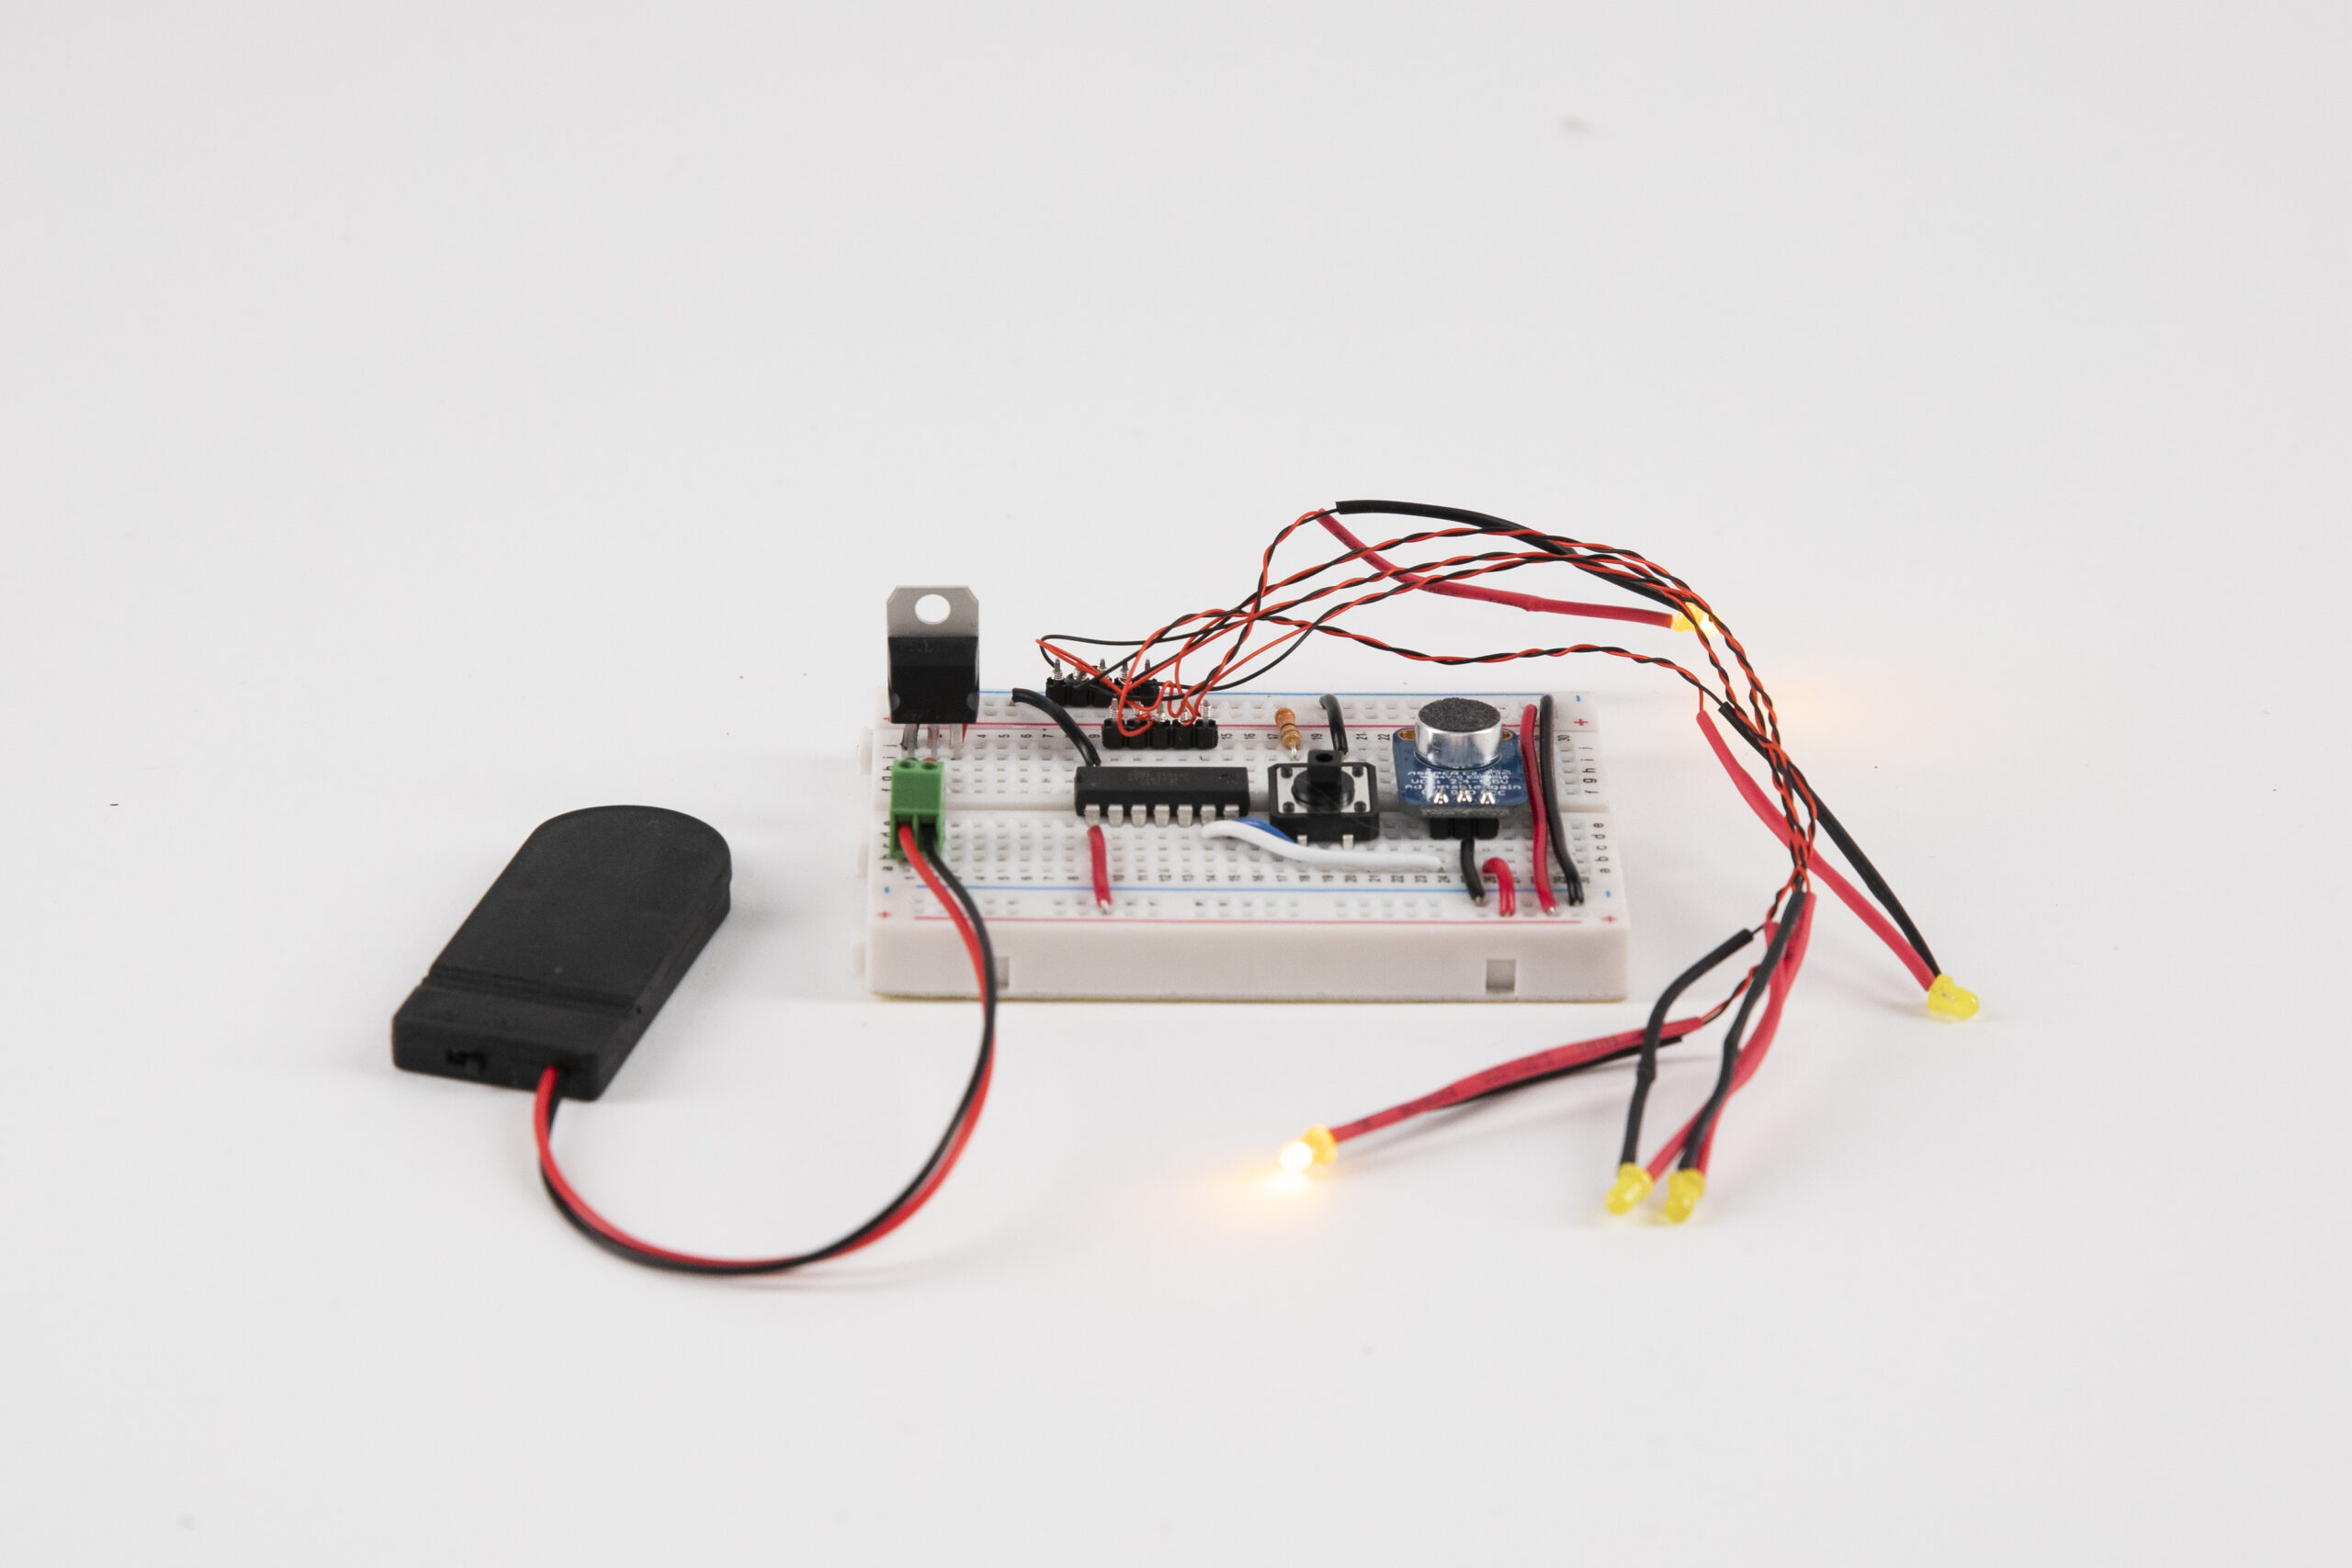 Breadboard with wires, voltage regulator, five yellow LEDs, microphone and battery pack connected to it.